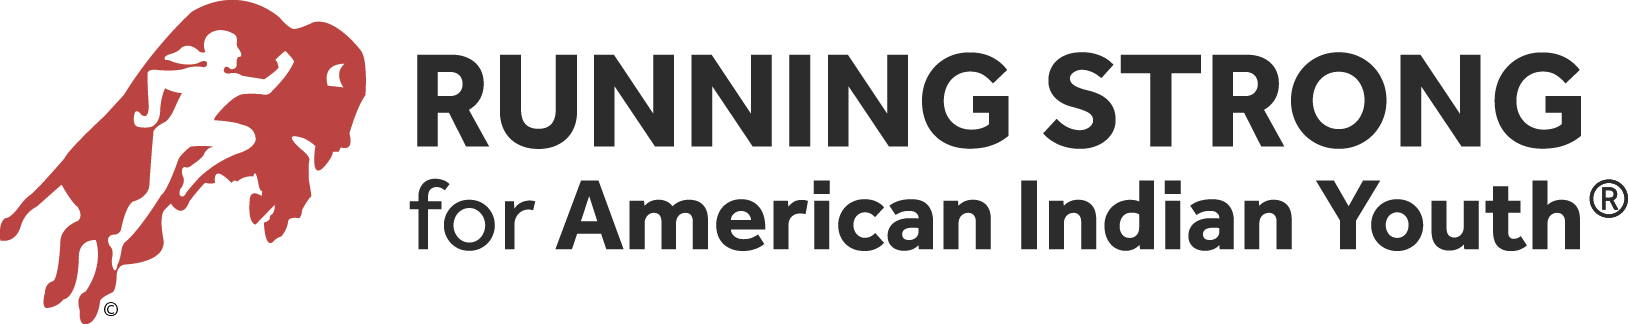 Running Strong for American Indian Youth